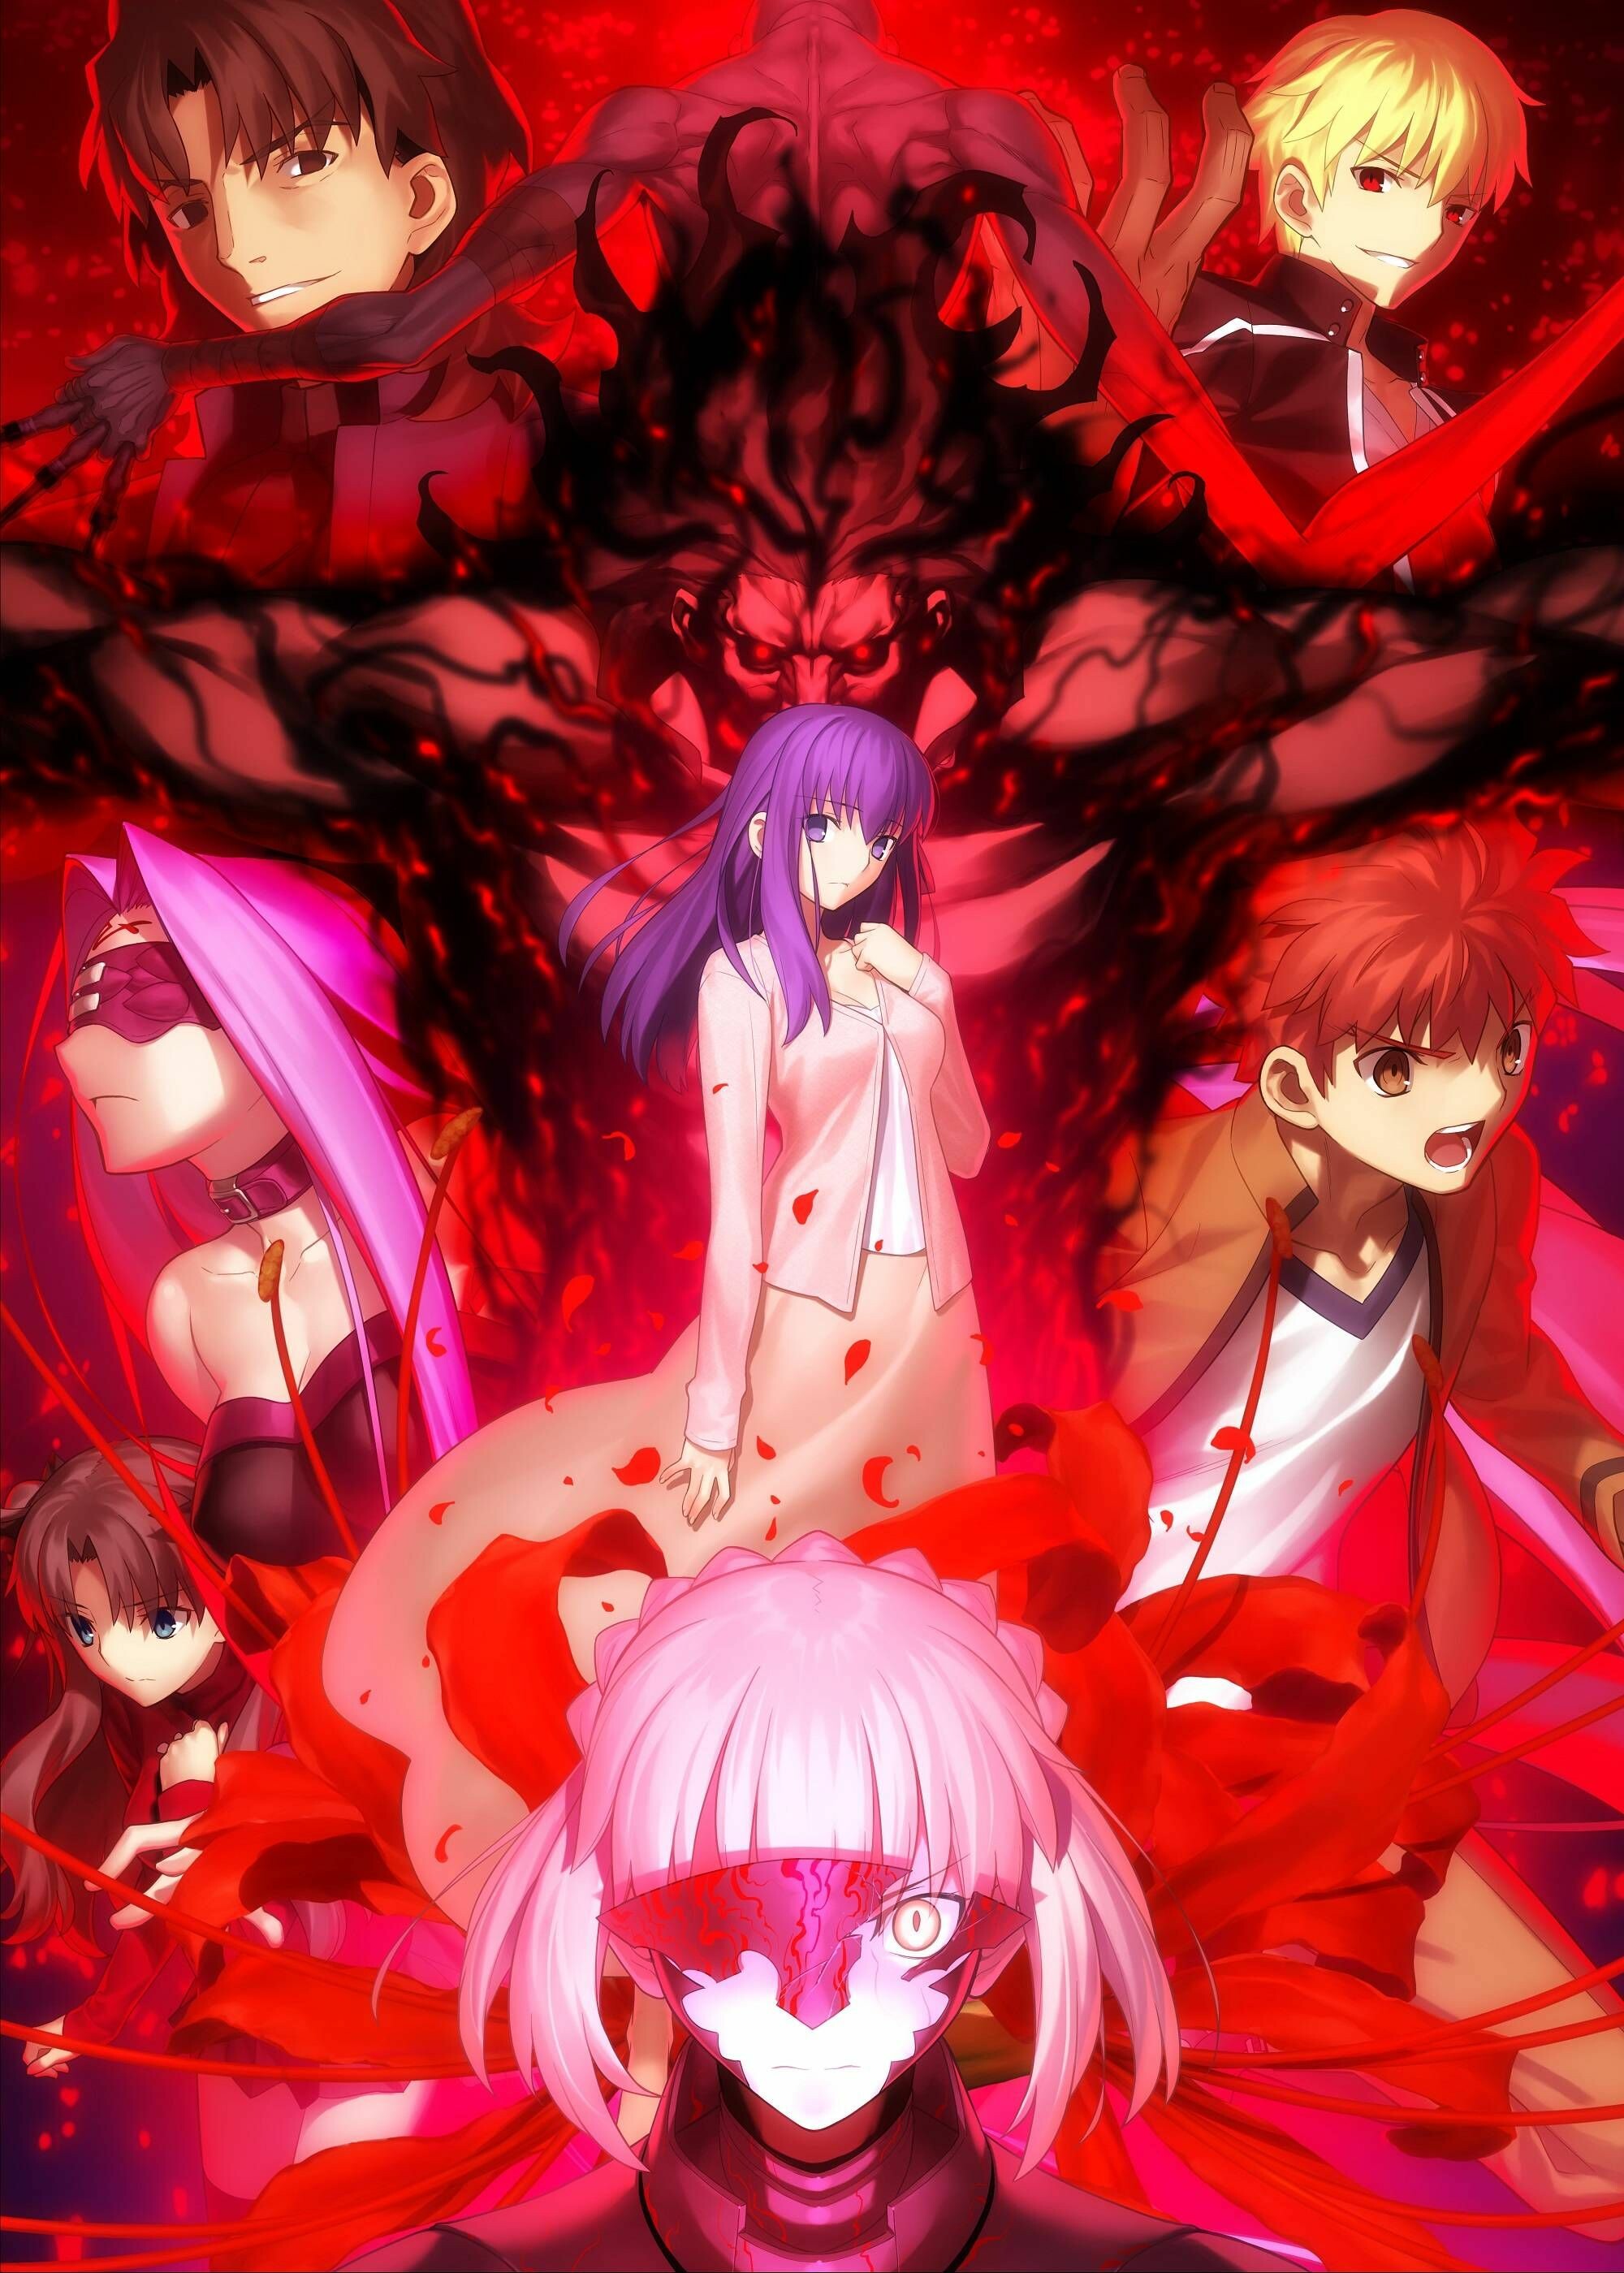 Fate/stay night: Heaven's Feel: Fourth anime adaptation of Type-Moon's works by Ufotable. 2000x2800 HD Wallpaper.